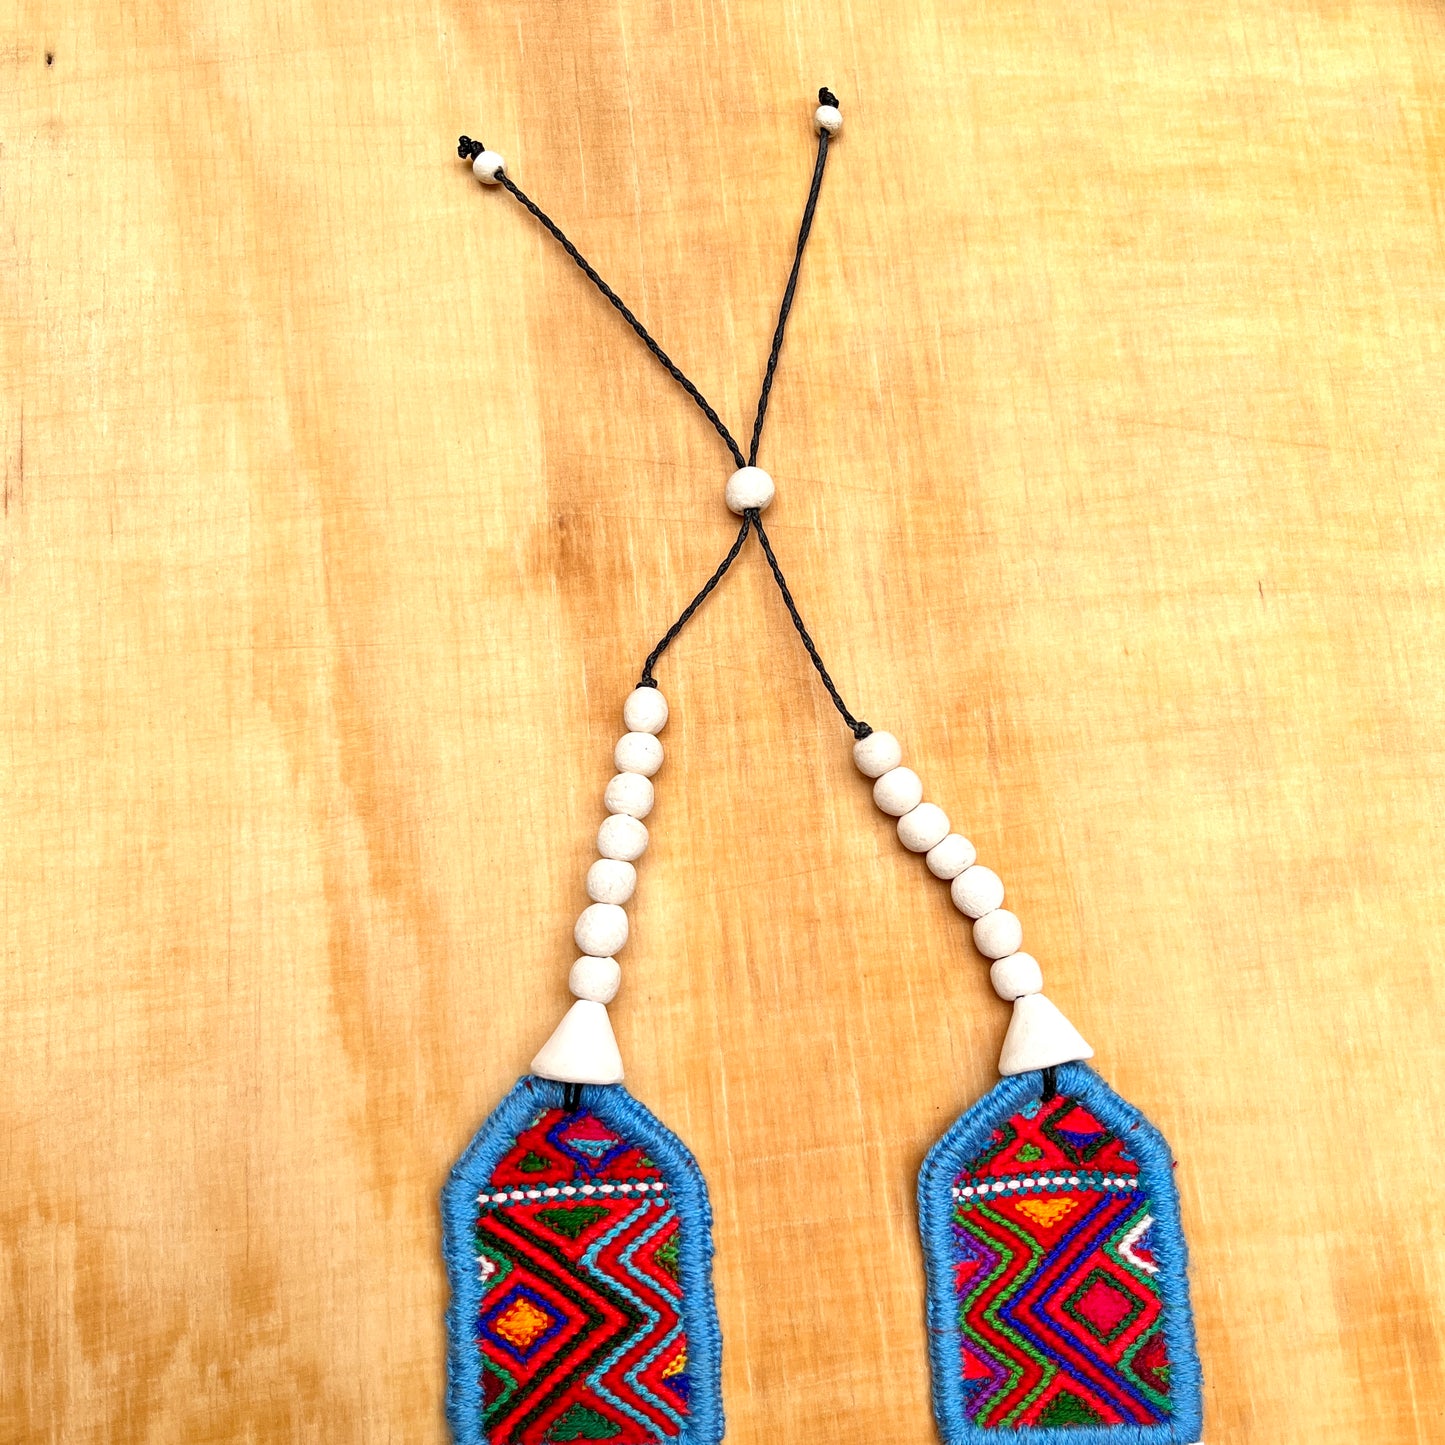 Necklaces with ceremonial textile and beaded chains - "Aguacatán Blancos"